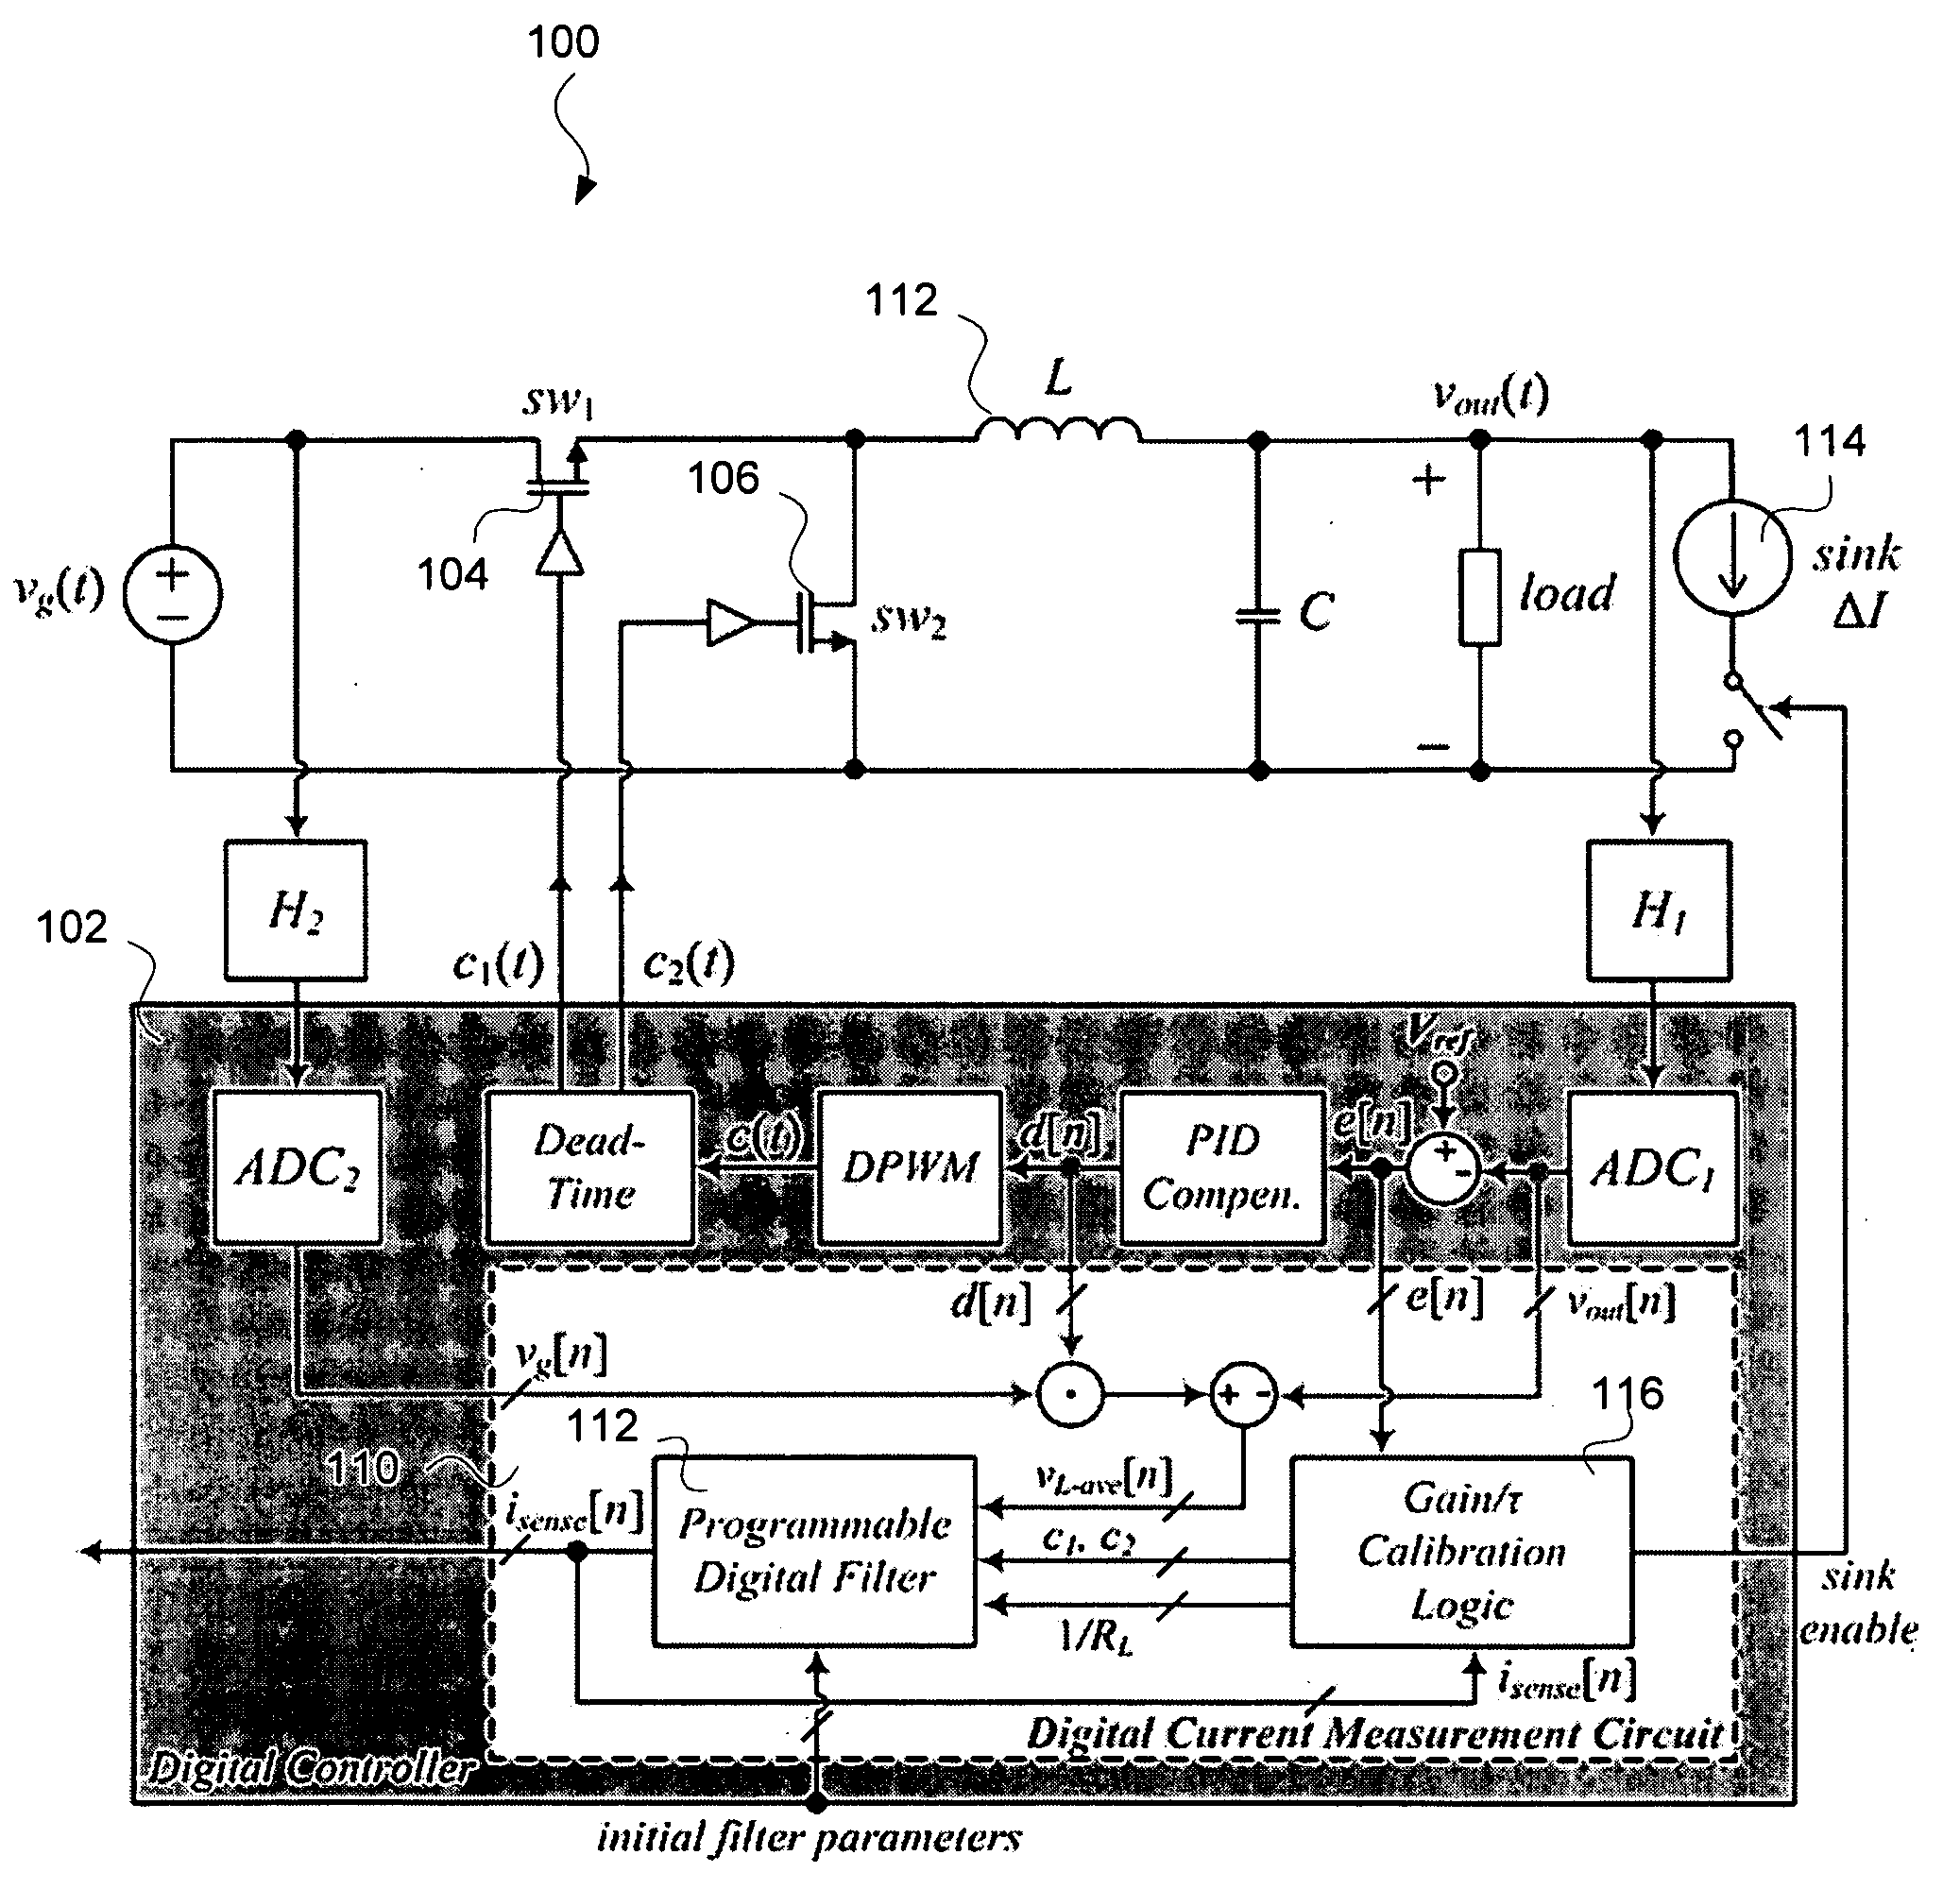 Self-tuning digital current estimator for low-power switching converters